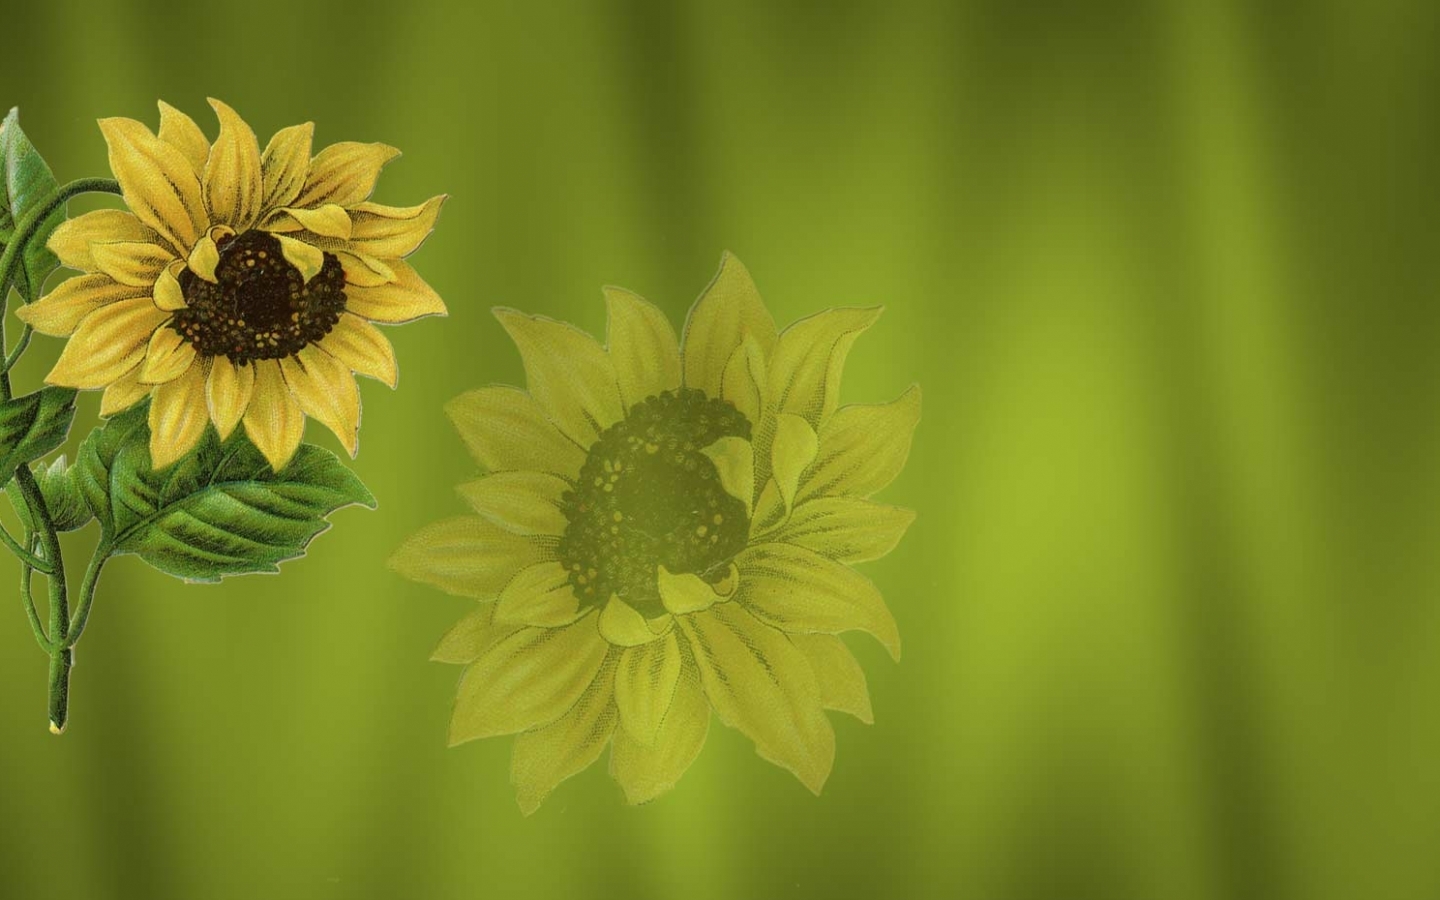 31537 download wallpaper flowers, green, pictures, sunflowers screensavers and pictures for free